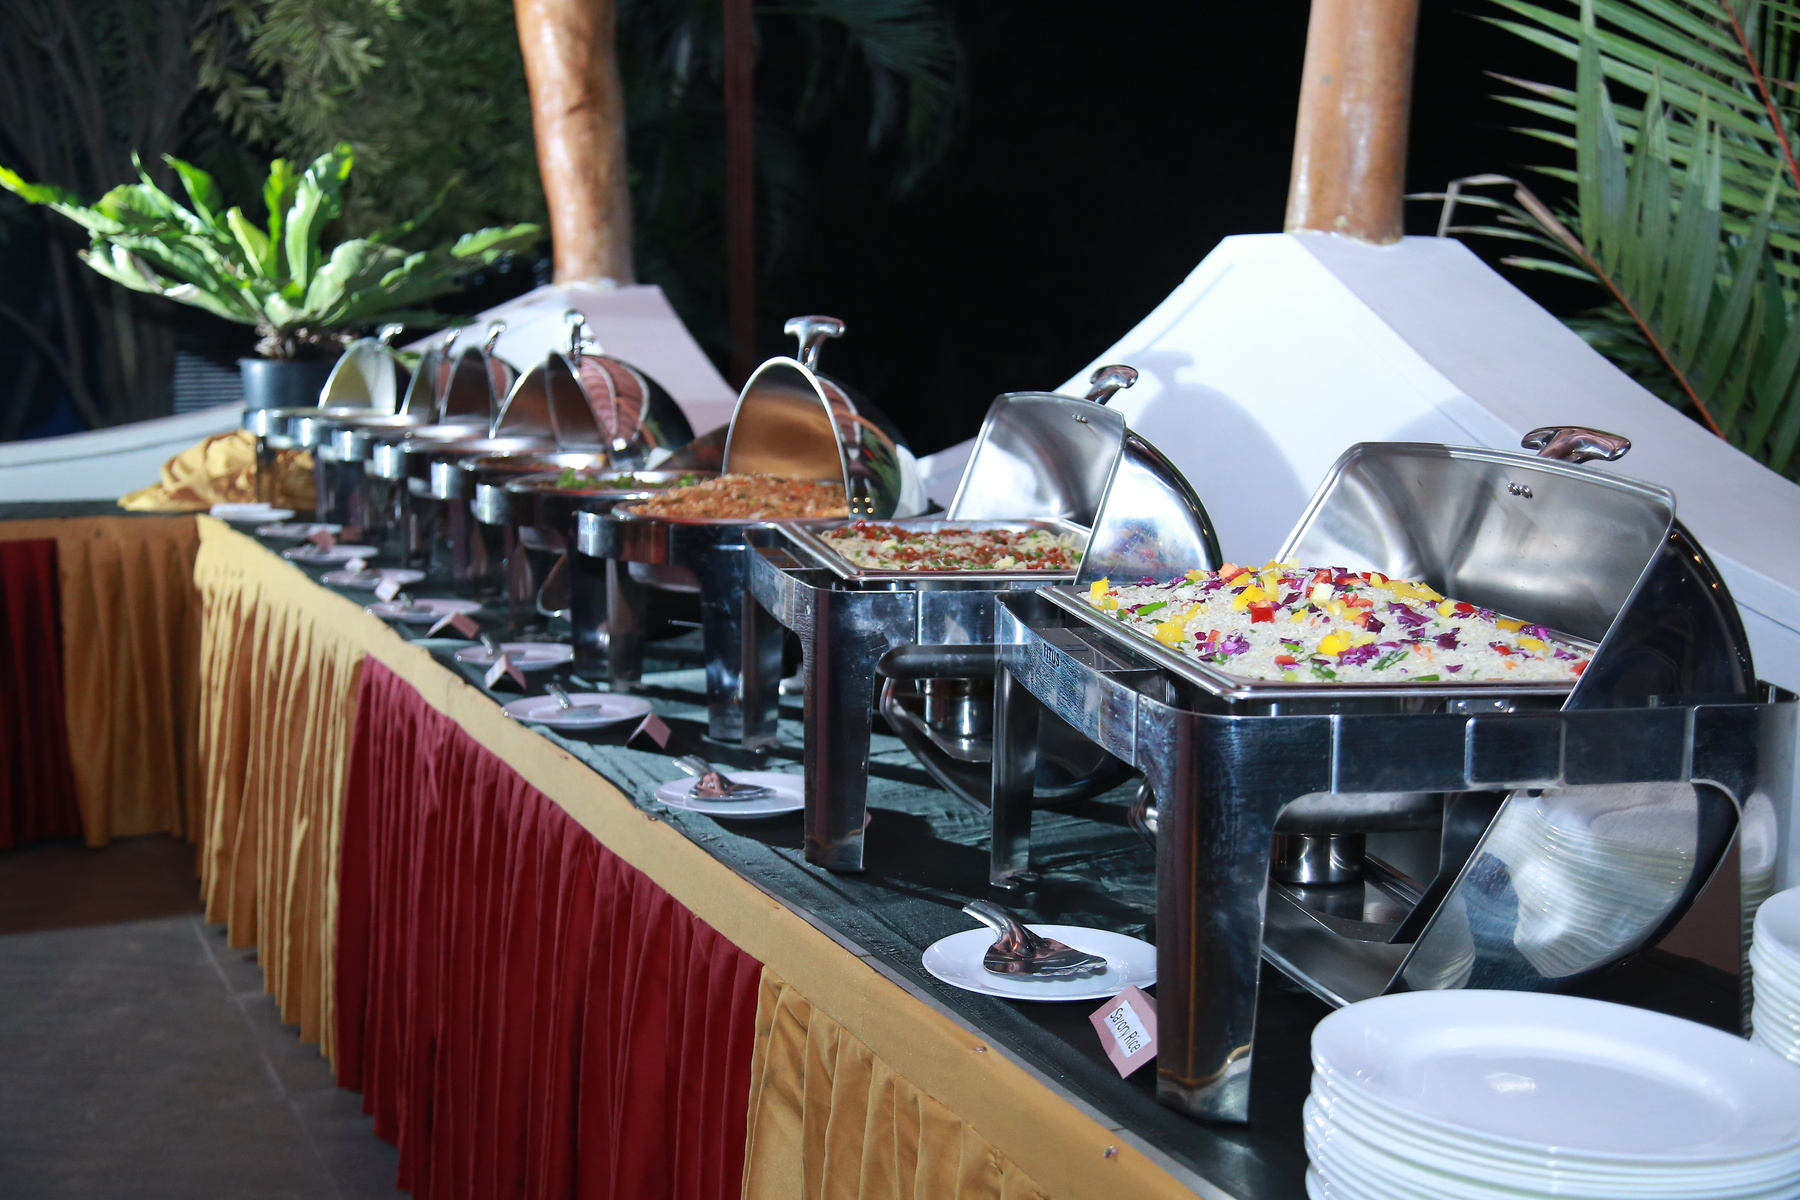 Factors to Consider for Indian Catering Hamilton Newcastle Sydney NSW - Raj's Corner